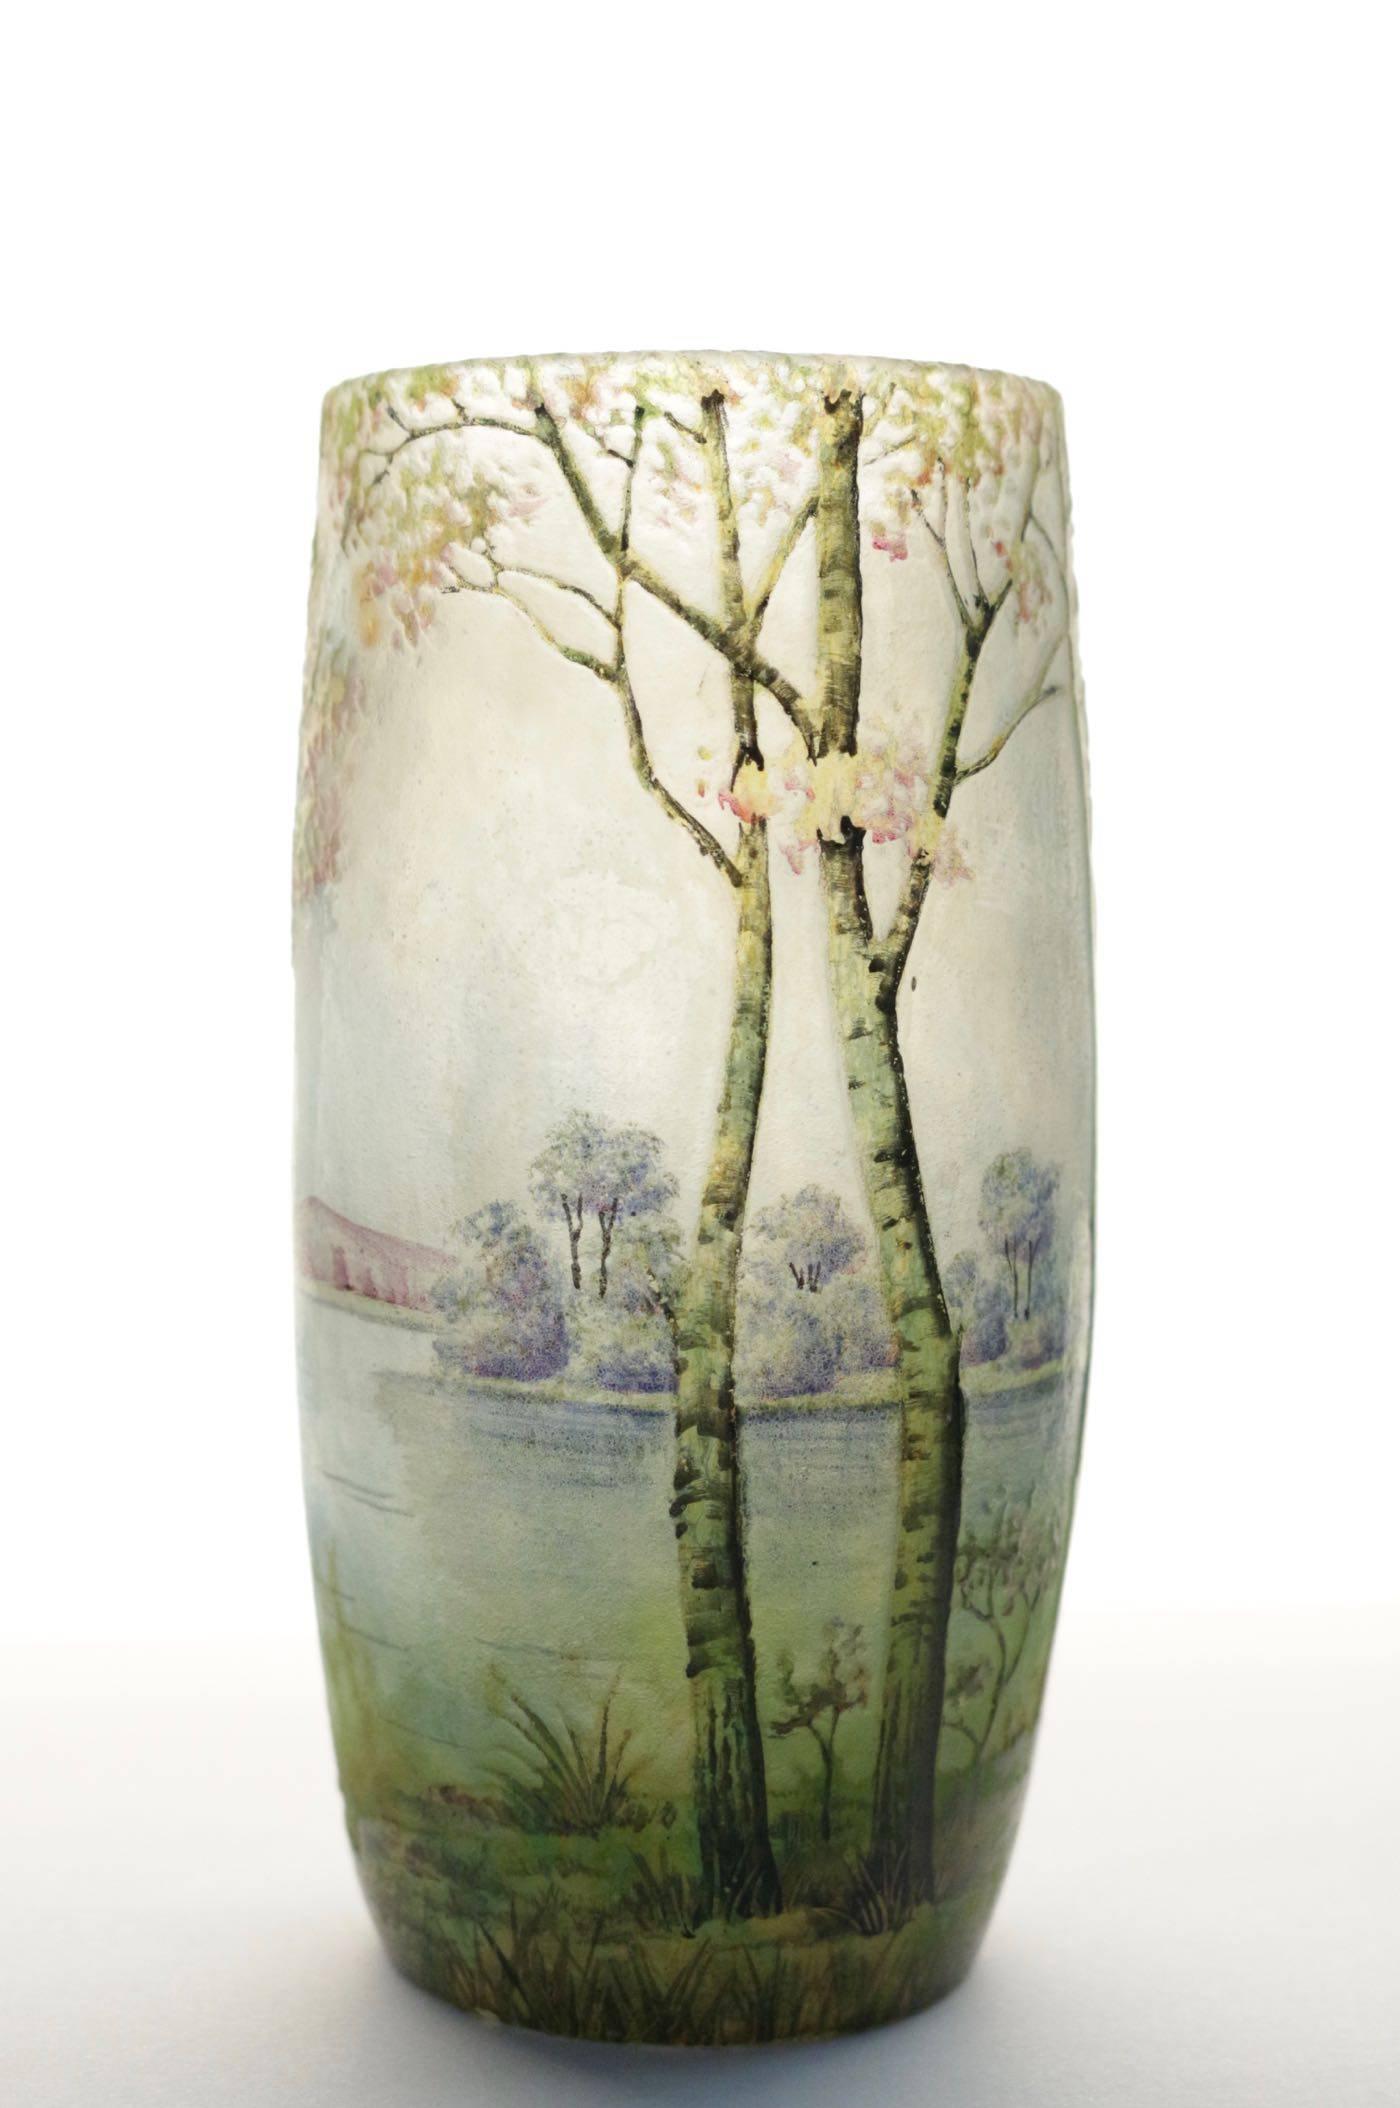 Daum Nancy
Daum enameled glass 'Sprint Landscape' scene vase
Goblet vase cameo glass
Acid etched and enameled with a forest landscape and lake, circa 1905
Possibly to get winter goblet for pair.